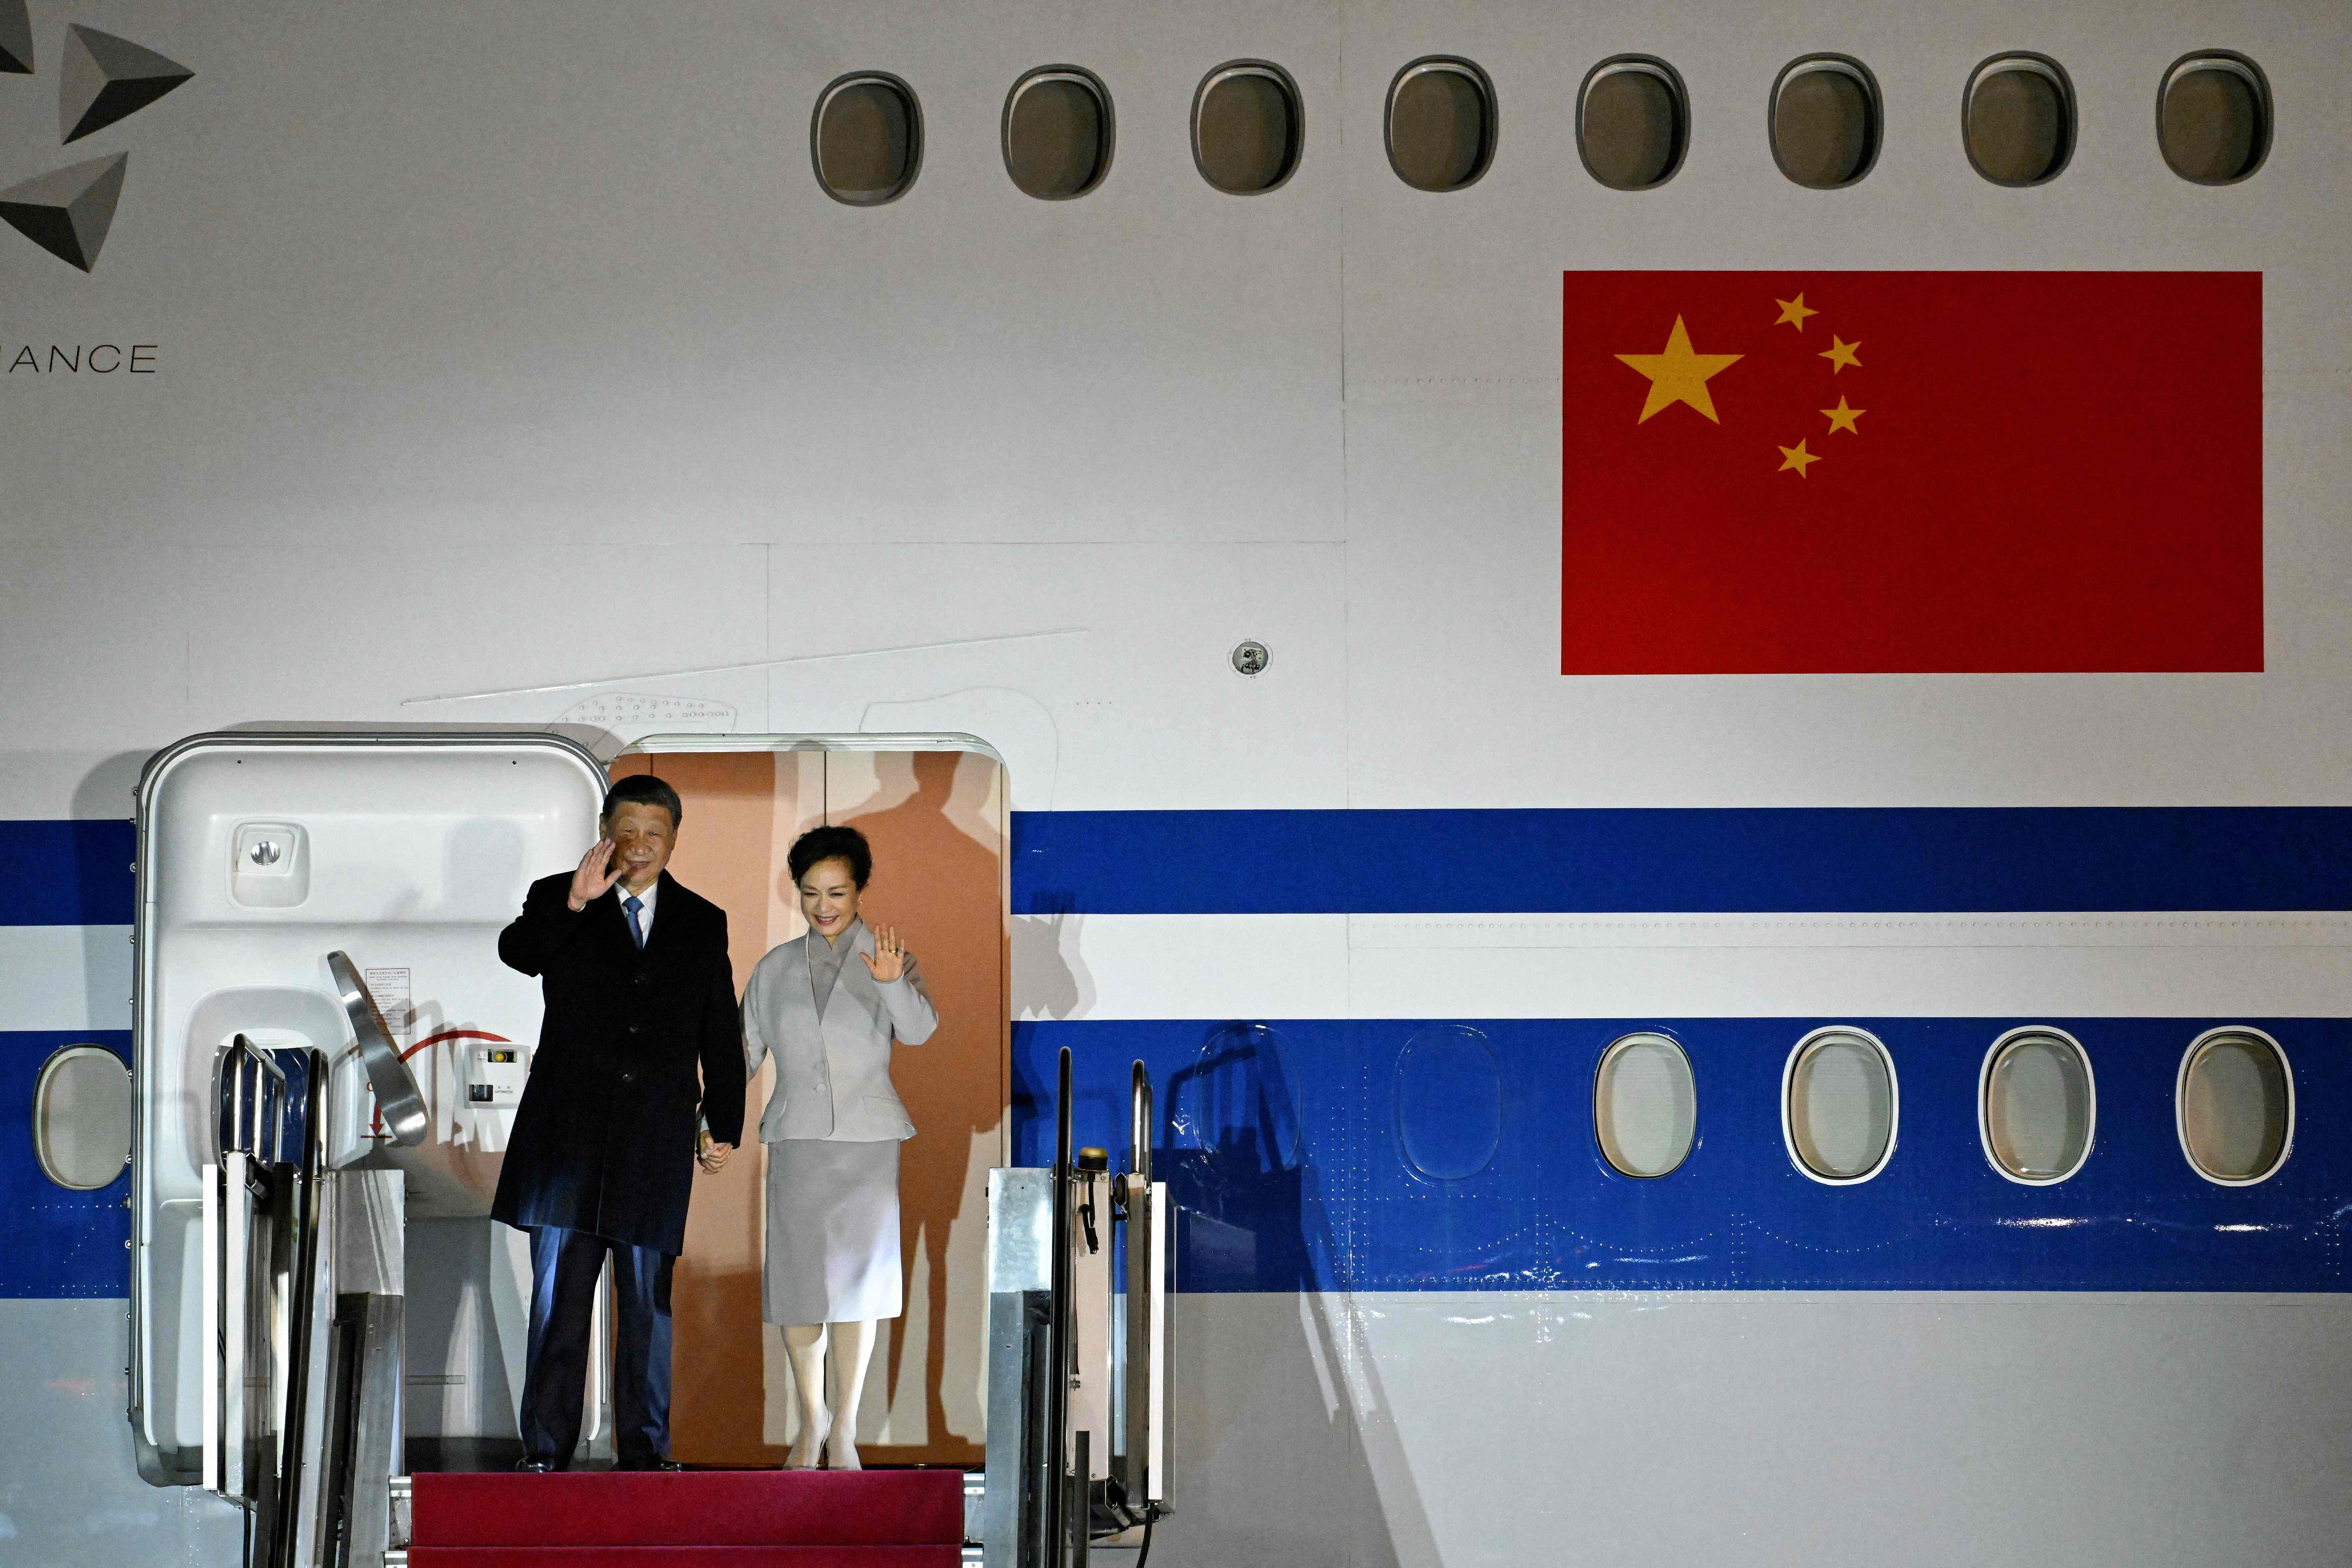 After Serbia, China's Xi arrives in Hungary to tighten bonds